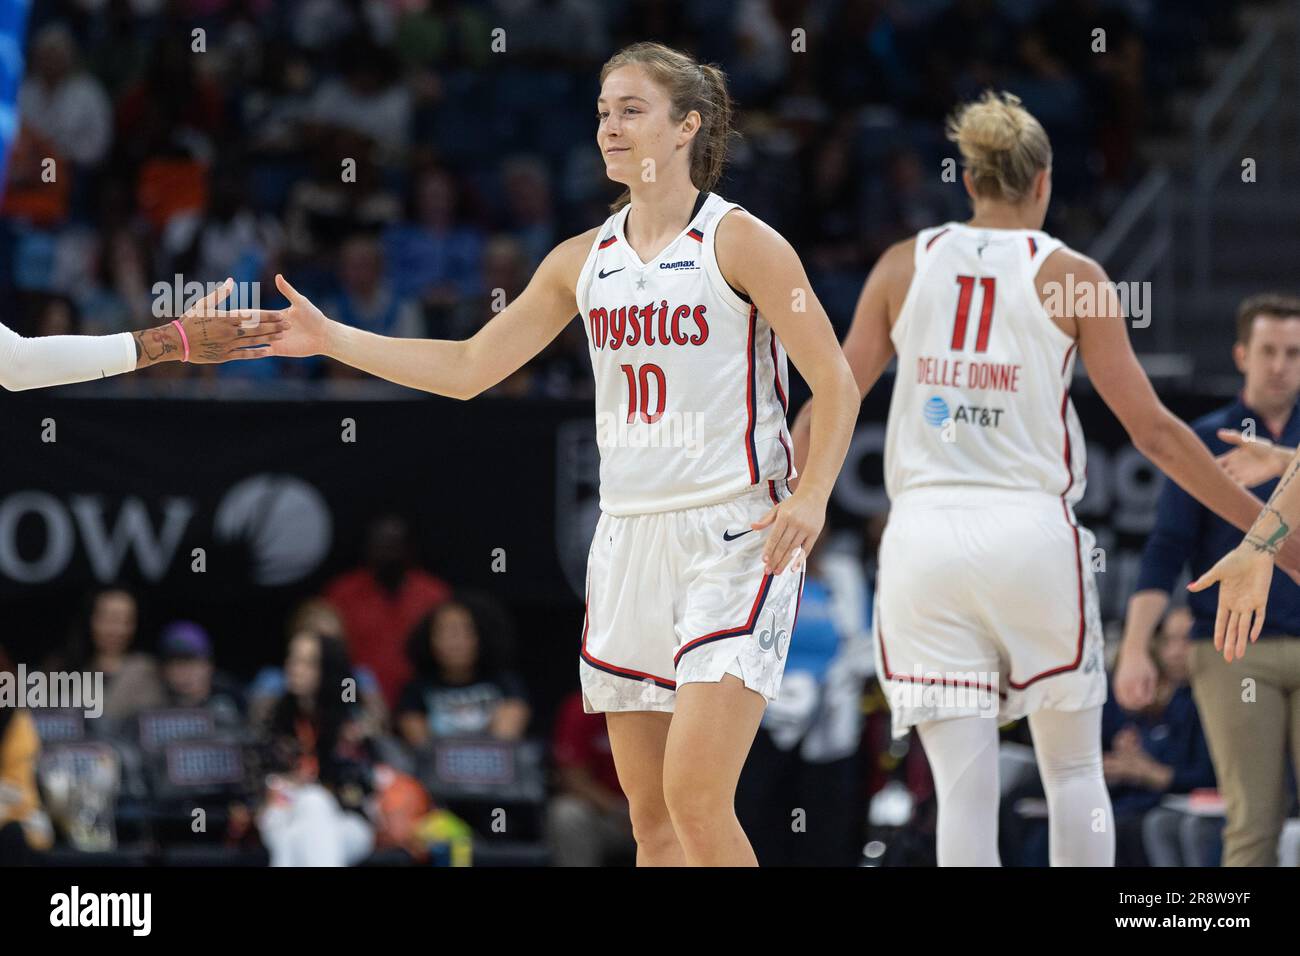 Chicago, USA. 22nd June, 2023. Chicago, USA, June 22, 2023: Abby Meyers (10 Washington Mystics) enters the game between the Chicago Sky and Washington Mystics on Thursday June 22, 2023 at Wintrust Arena, Chicago, USA. (NO COMMERCIAL USAGE) (Shaina Benhiyoun/SPP) Credit: SPP Sport Press Photo. /Alamy Live News Stock Photo